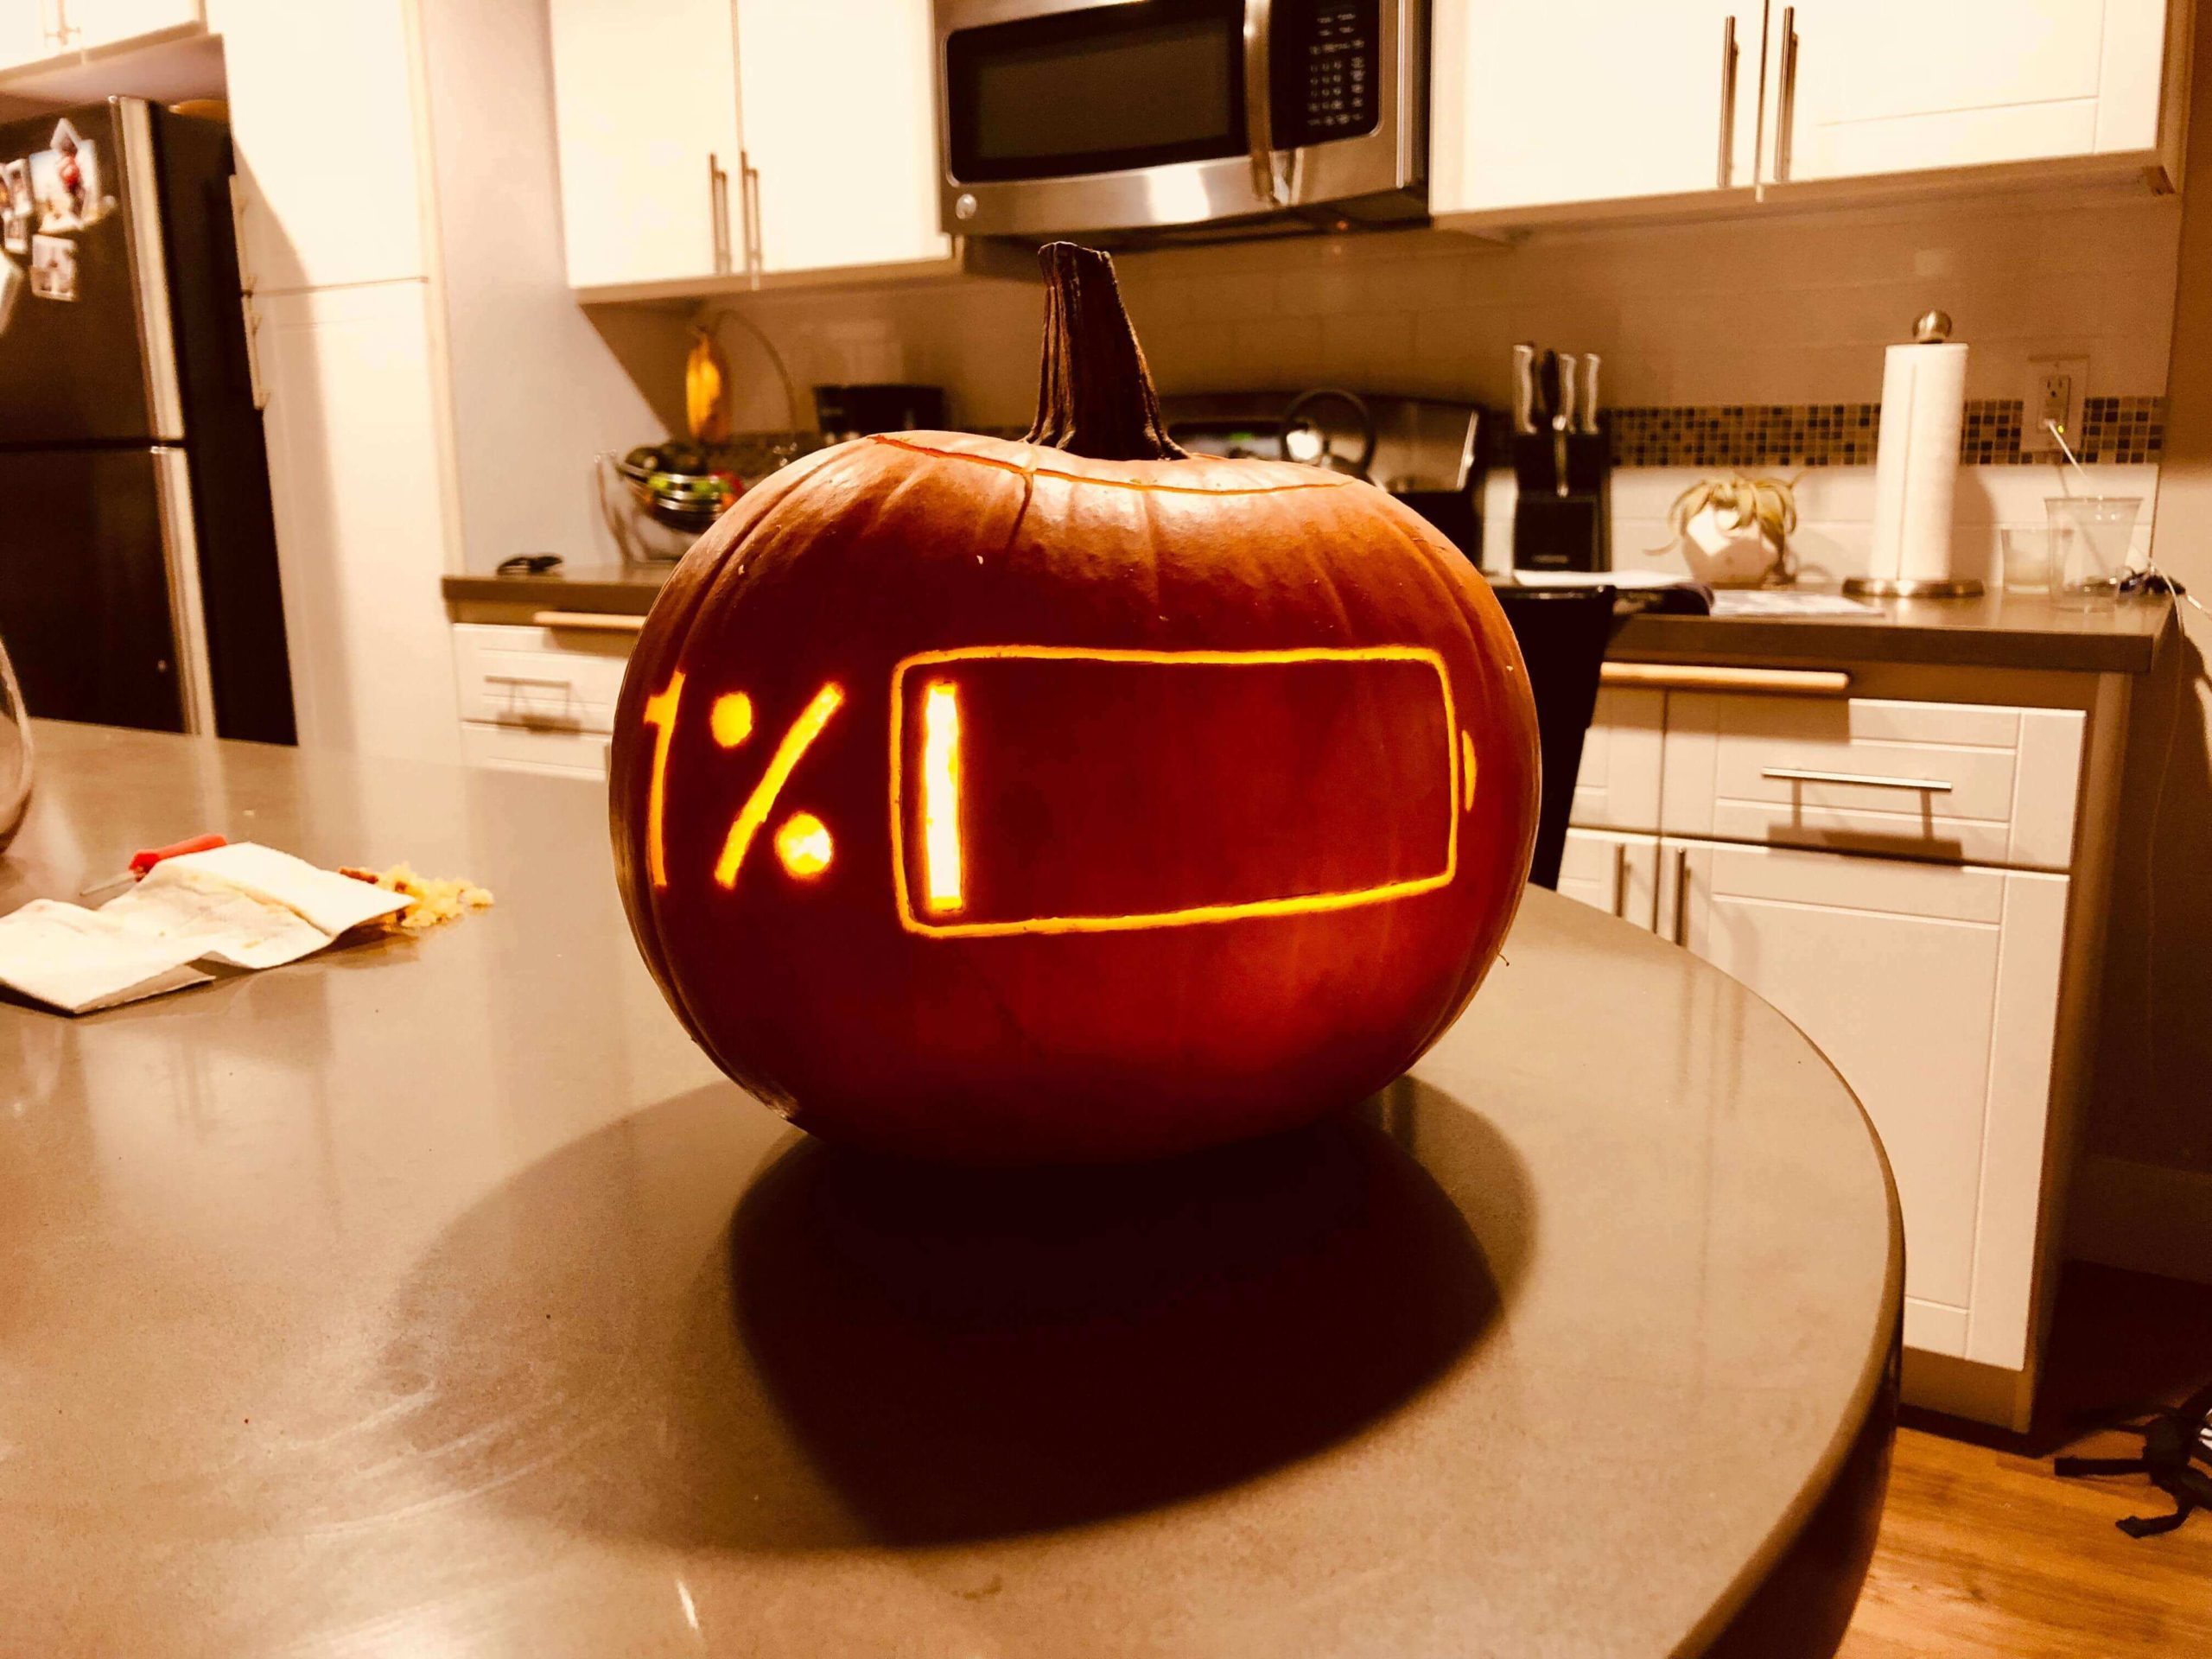 A pumpkin carved for halloween. It has the shape of a battery on it, with the 1% showing.